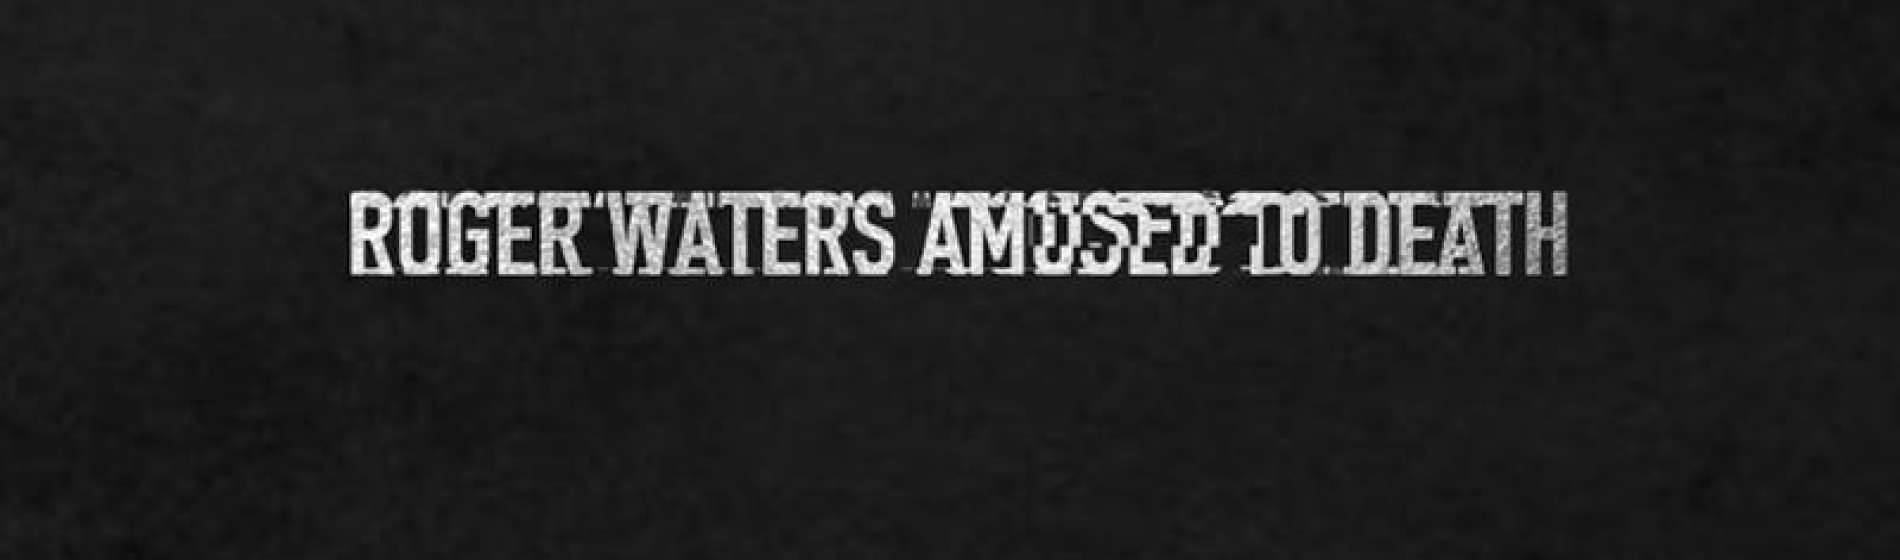 Roger Waters Amused to Death Featured